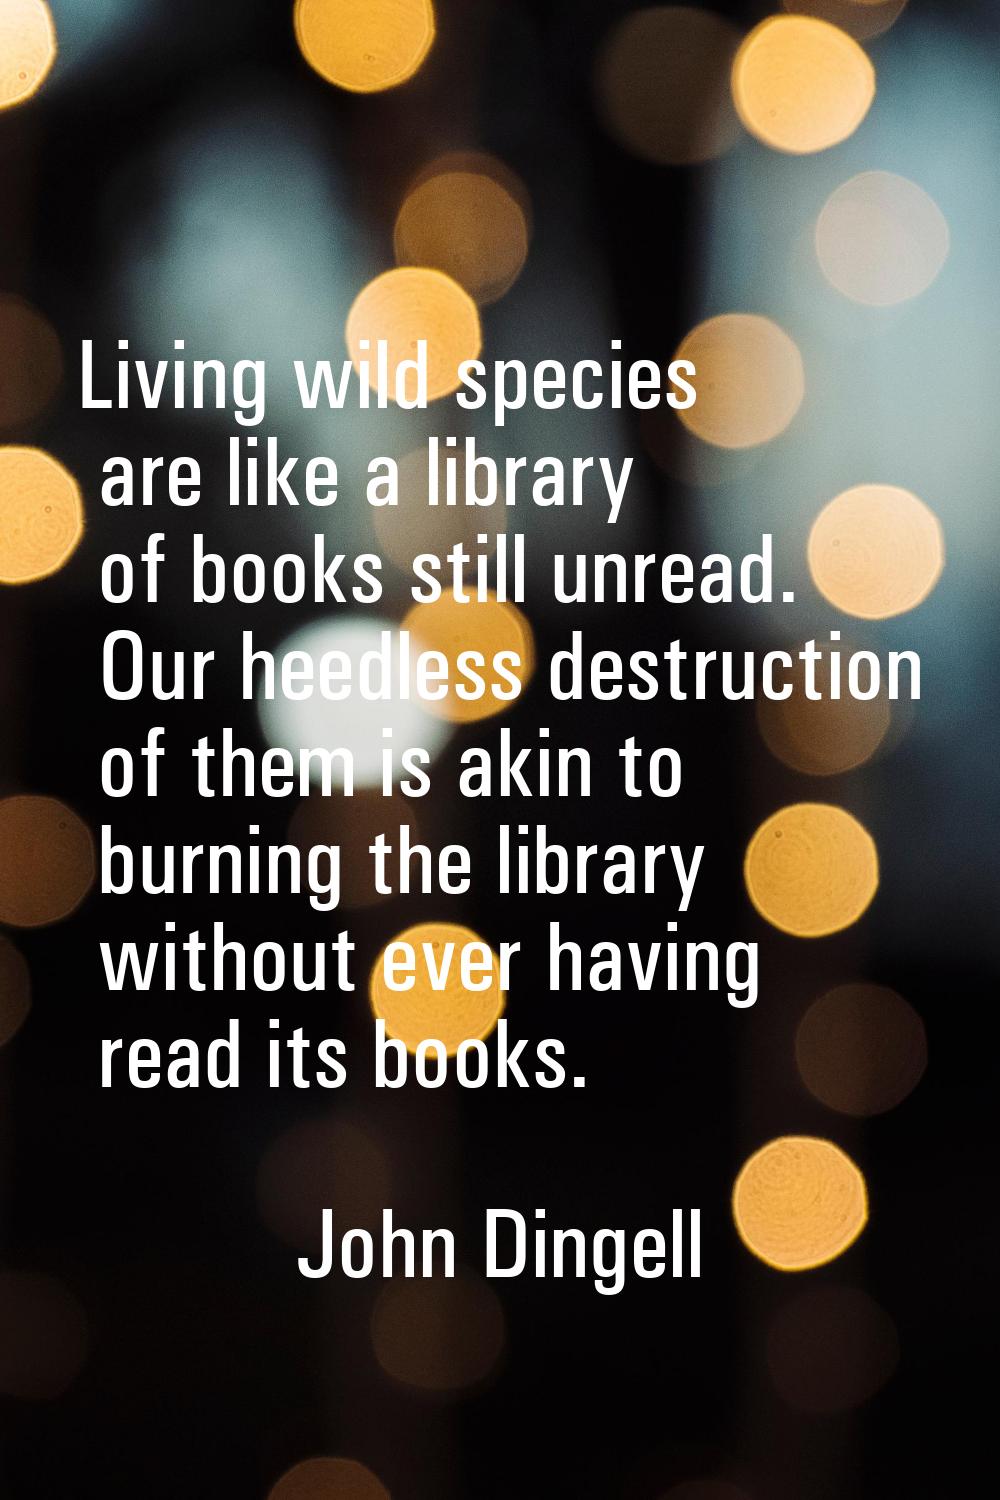 Living wild species are like a library of books still unread. Our heedless destruction of them is a